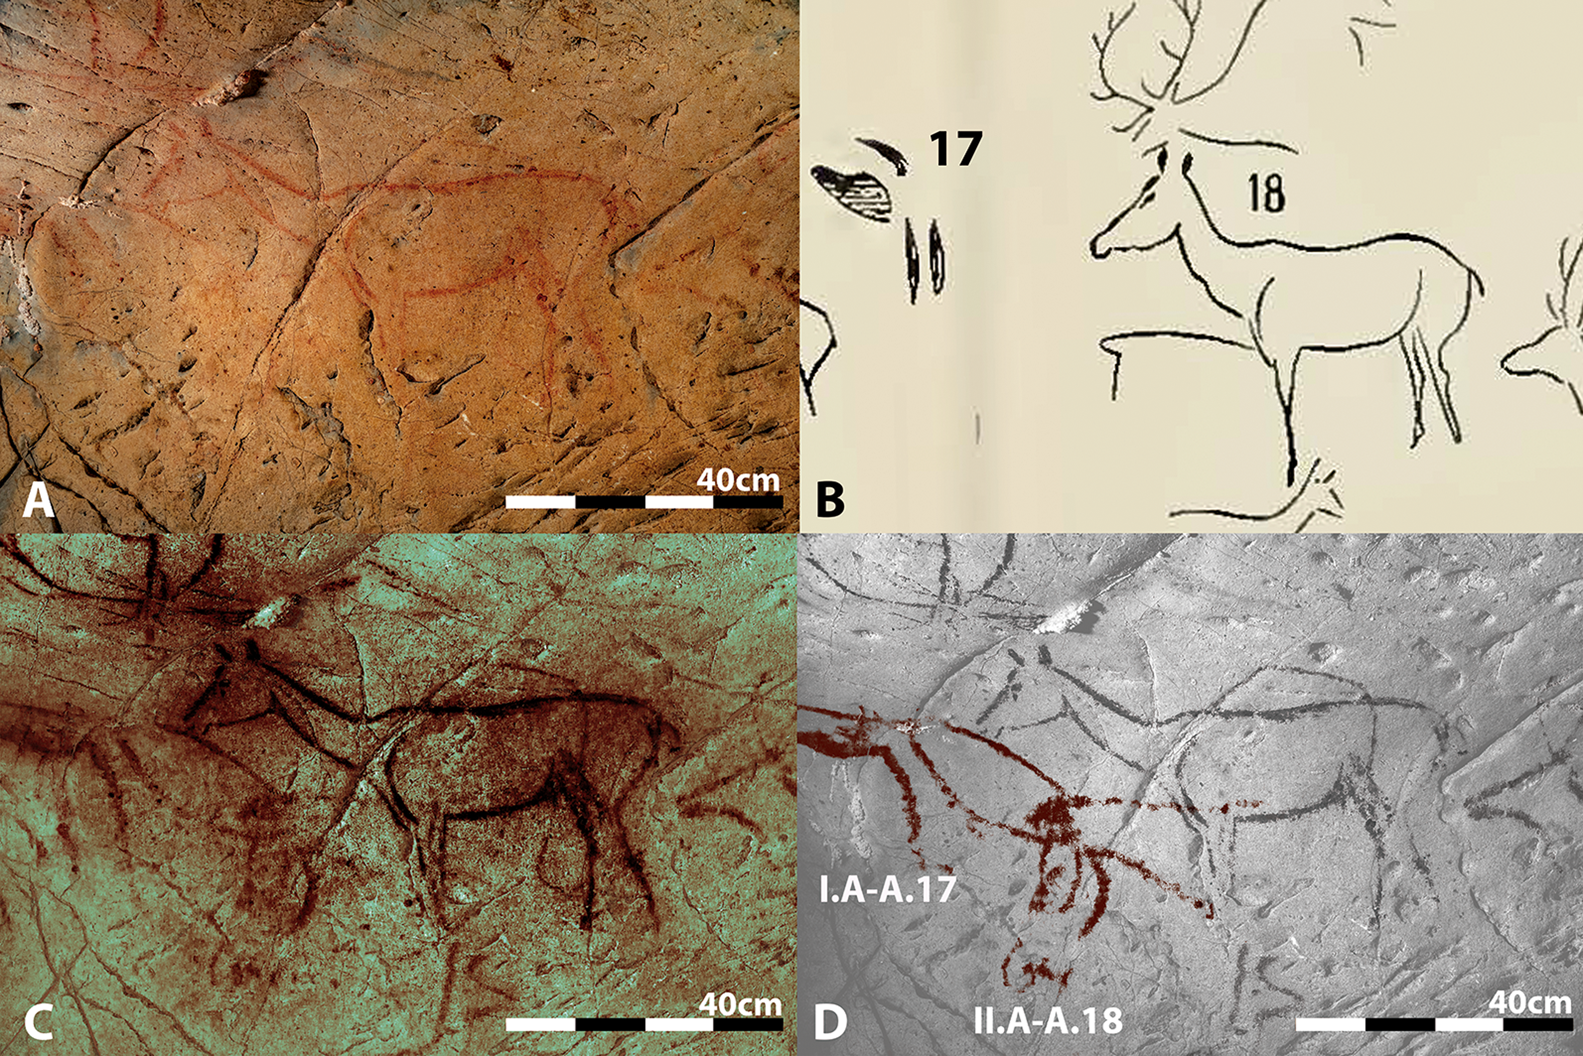 Animals hidden in plain sight: stereoscopic recording of Palaeolithic rock  art at La Pasiega cave, Cantabria, Antiquity